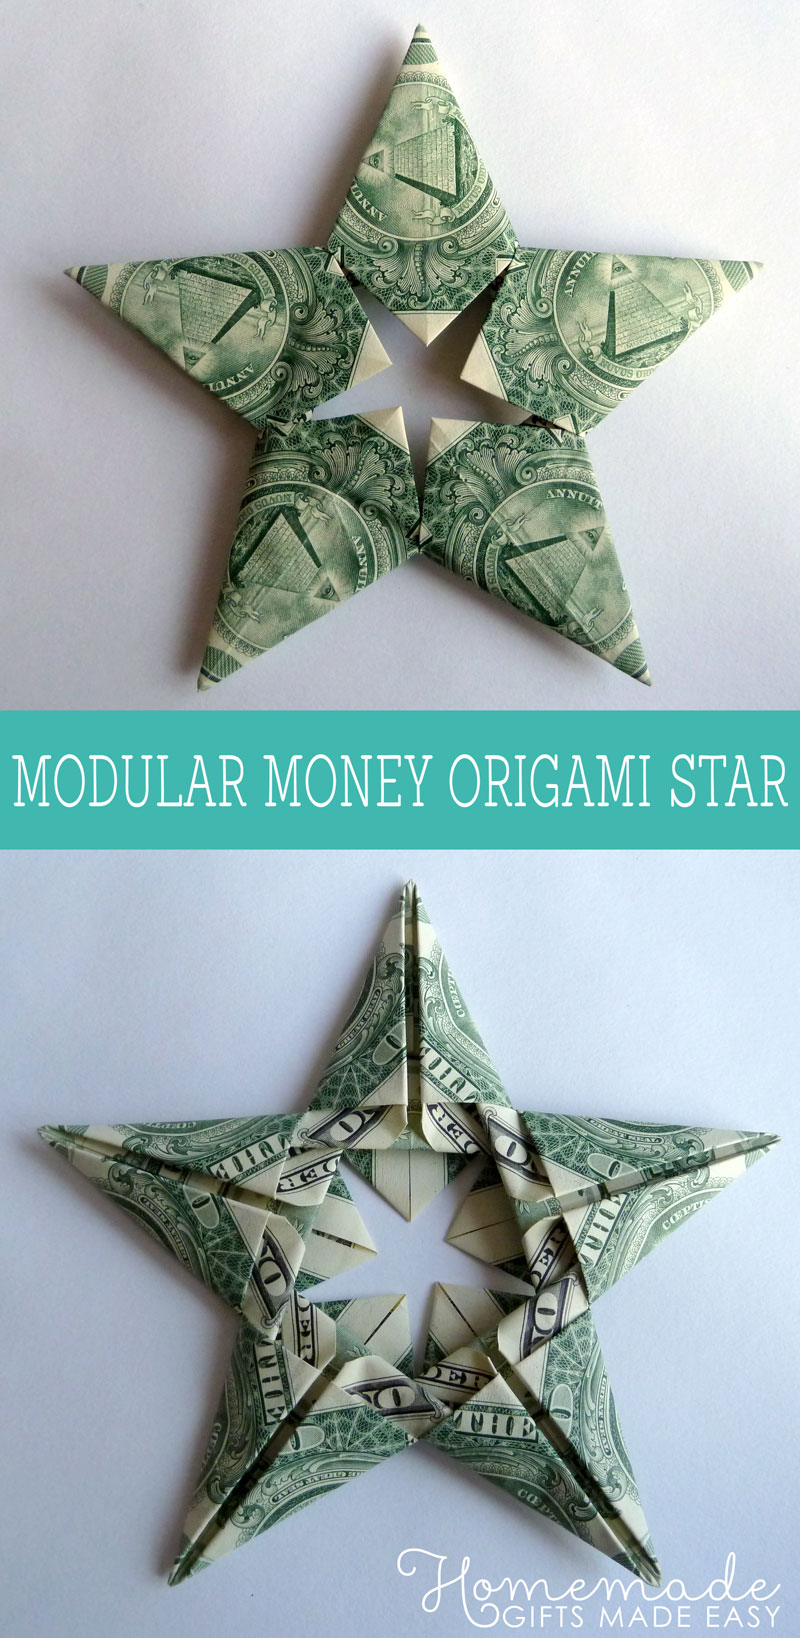 Easy Origami With Dollar Bills Modular Money Origami Star From 5 Bills How To Fold Step Step